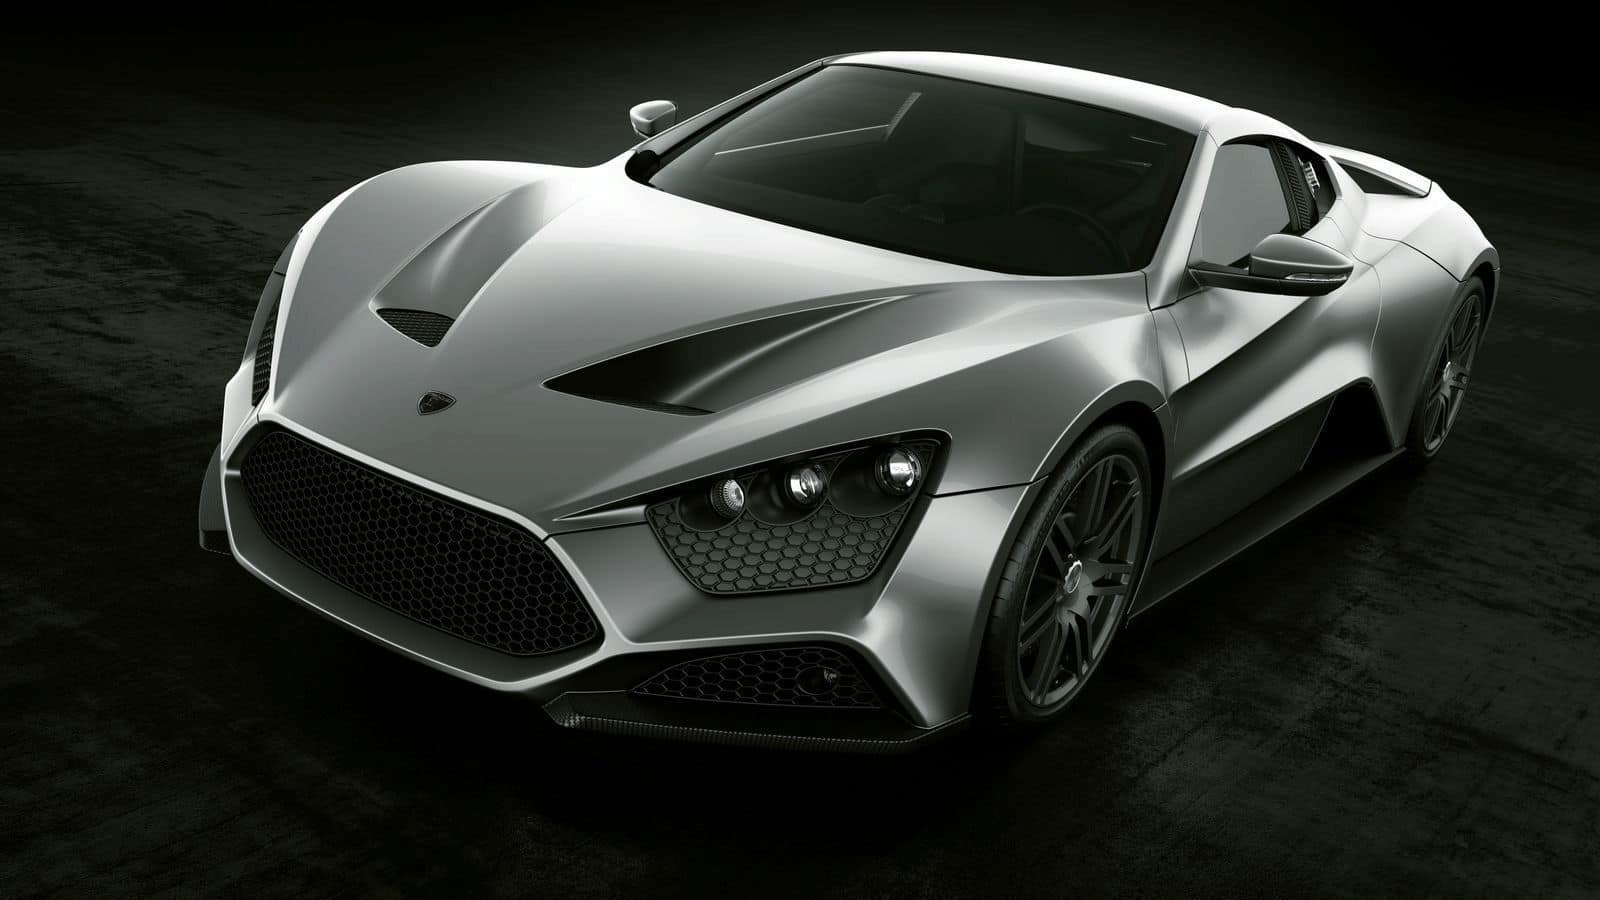   Bikes » Limited Edition ZENVO ST1 supercar priced at $1.8 million